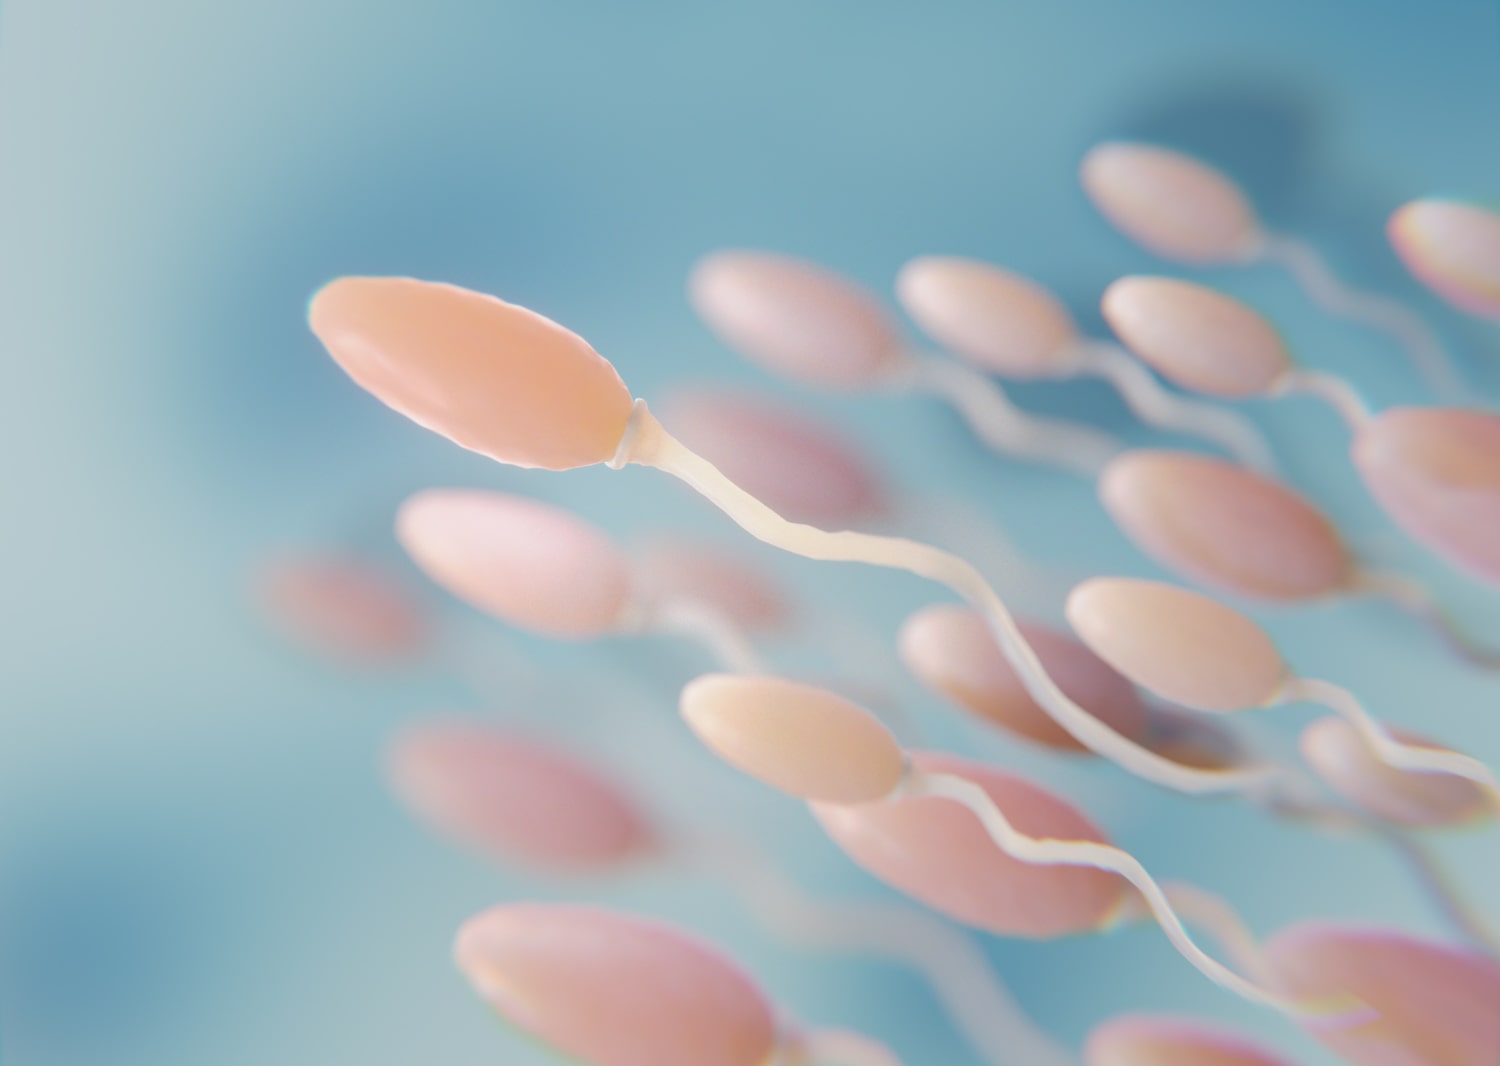 Lower sperm count for mobile